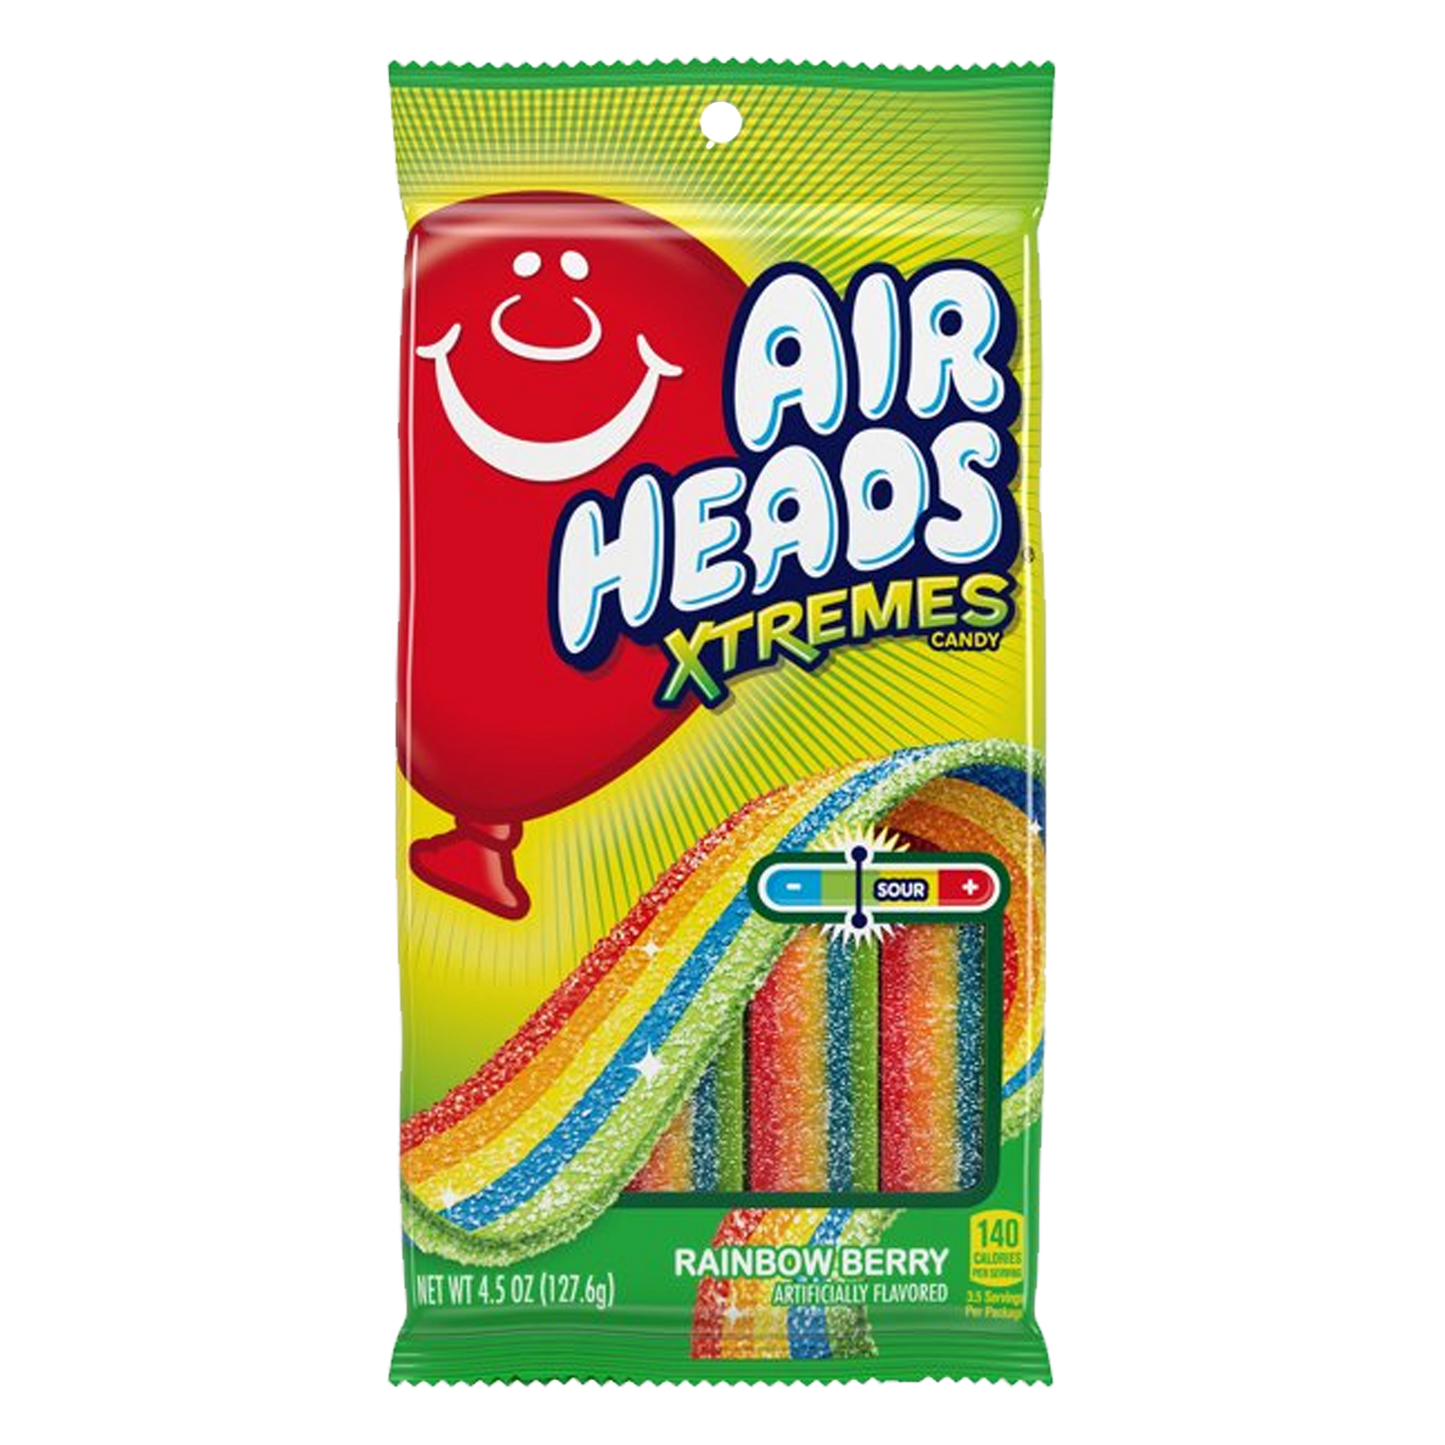 Airheads Xtremes Rainbow Berry Candy 127.6g